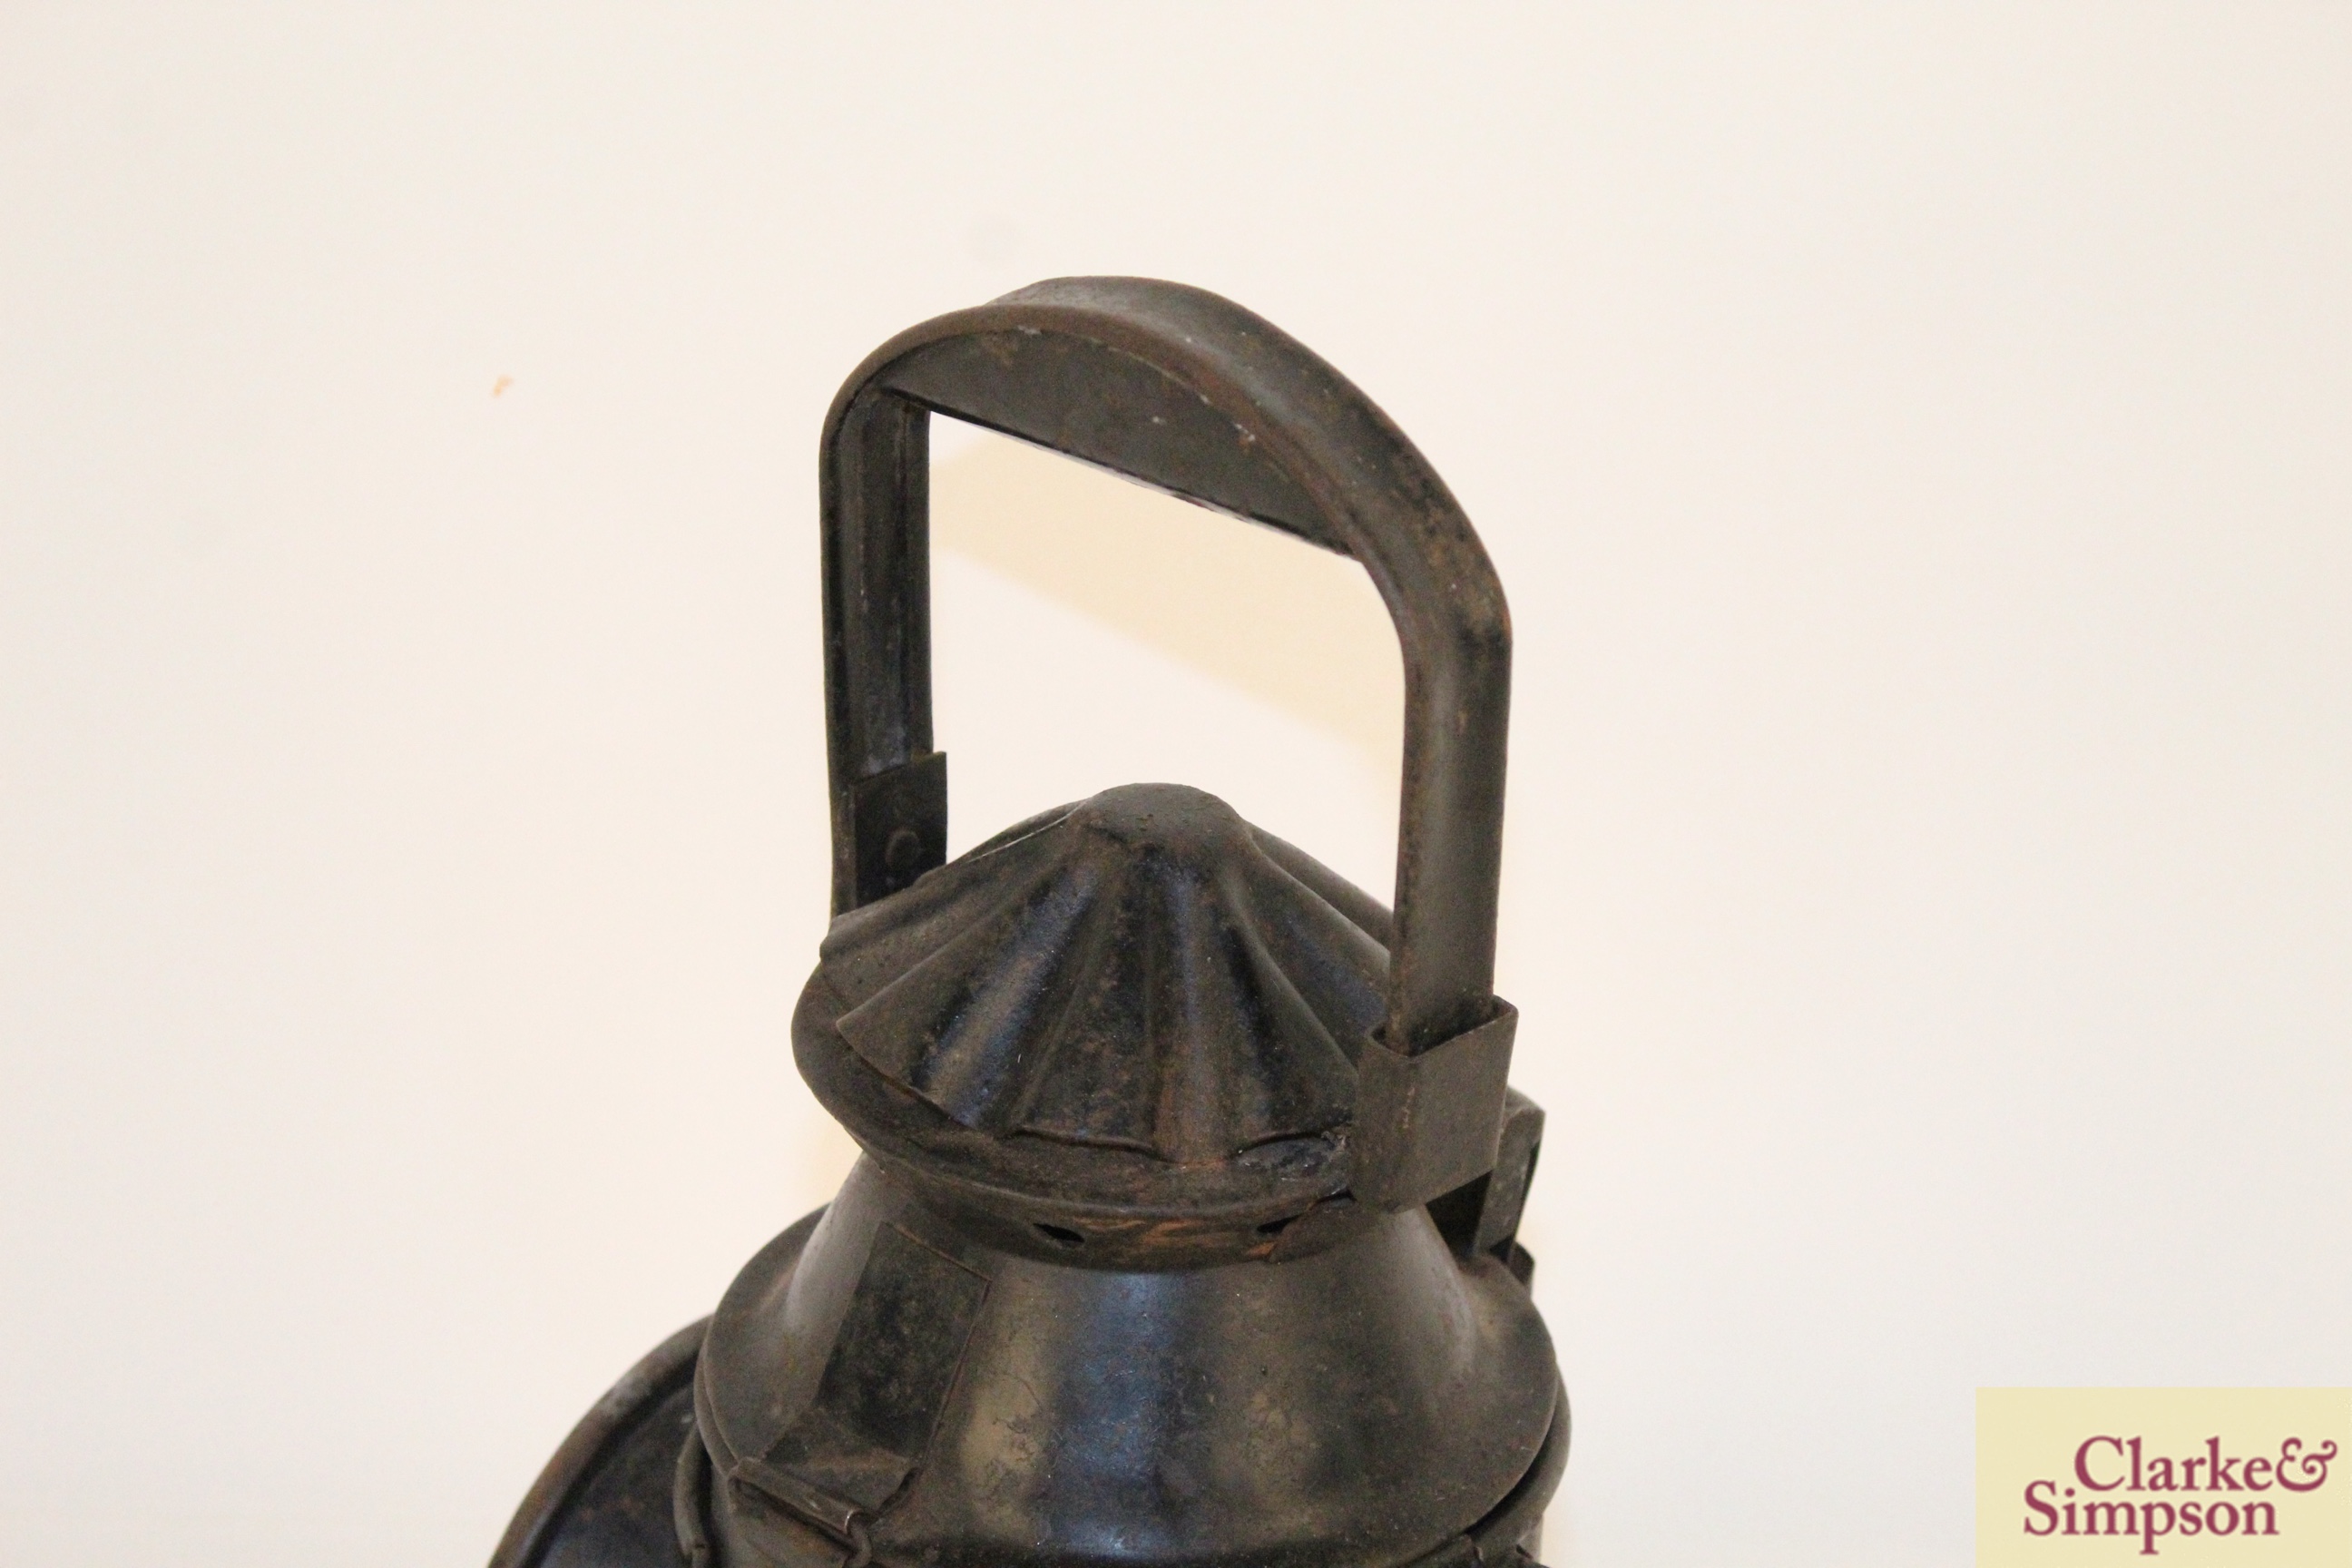 A vintage railway signal lamp - Image 4 of 5